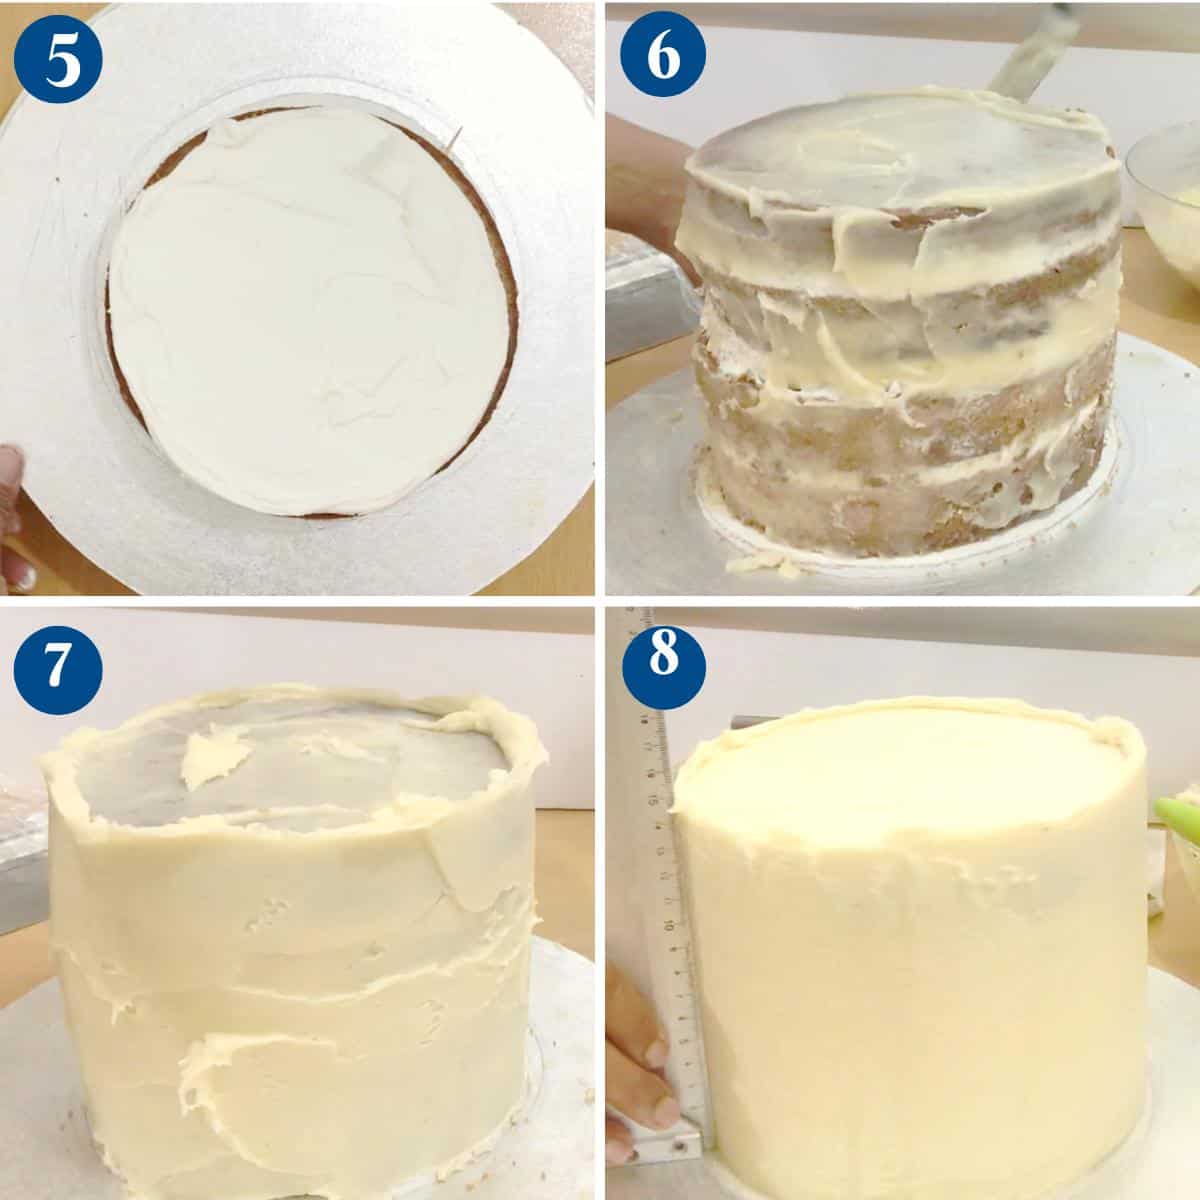 Progress pictures stacking the cake layers.